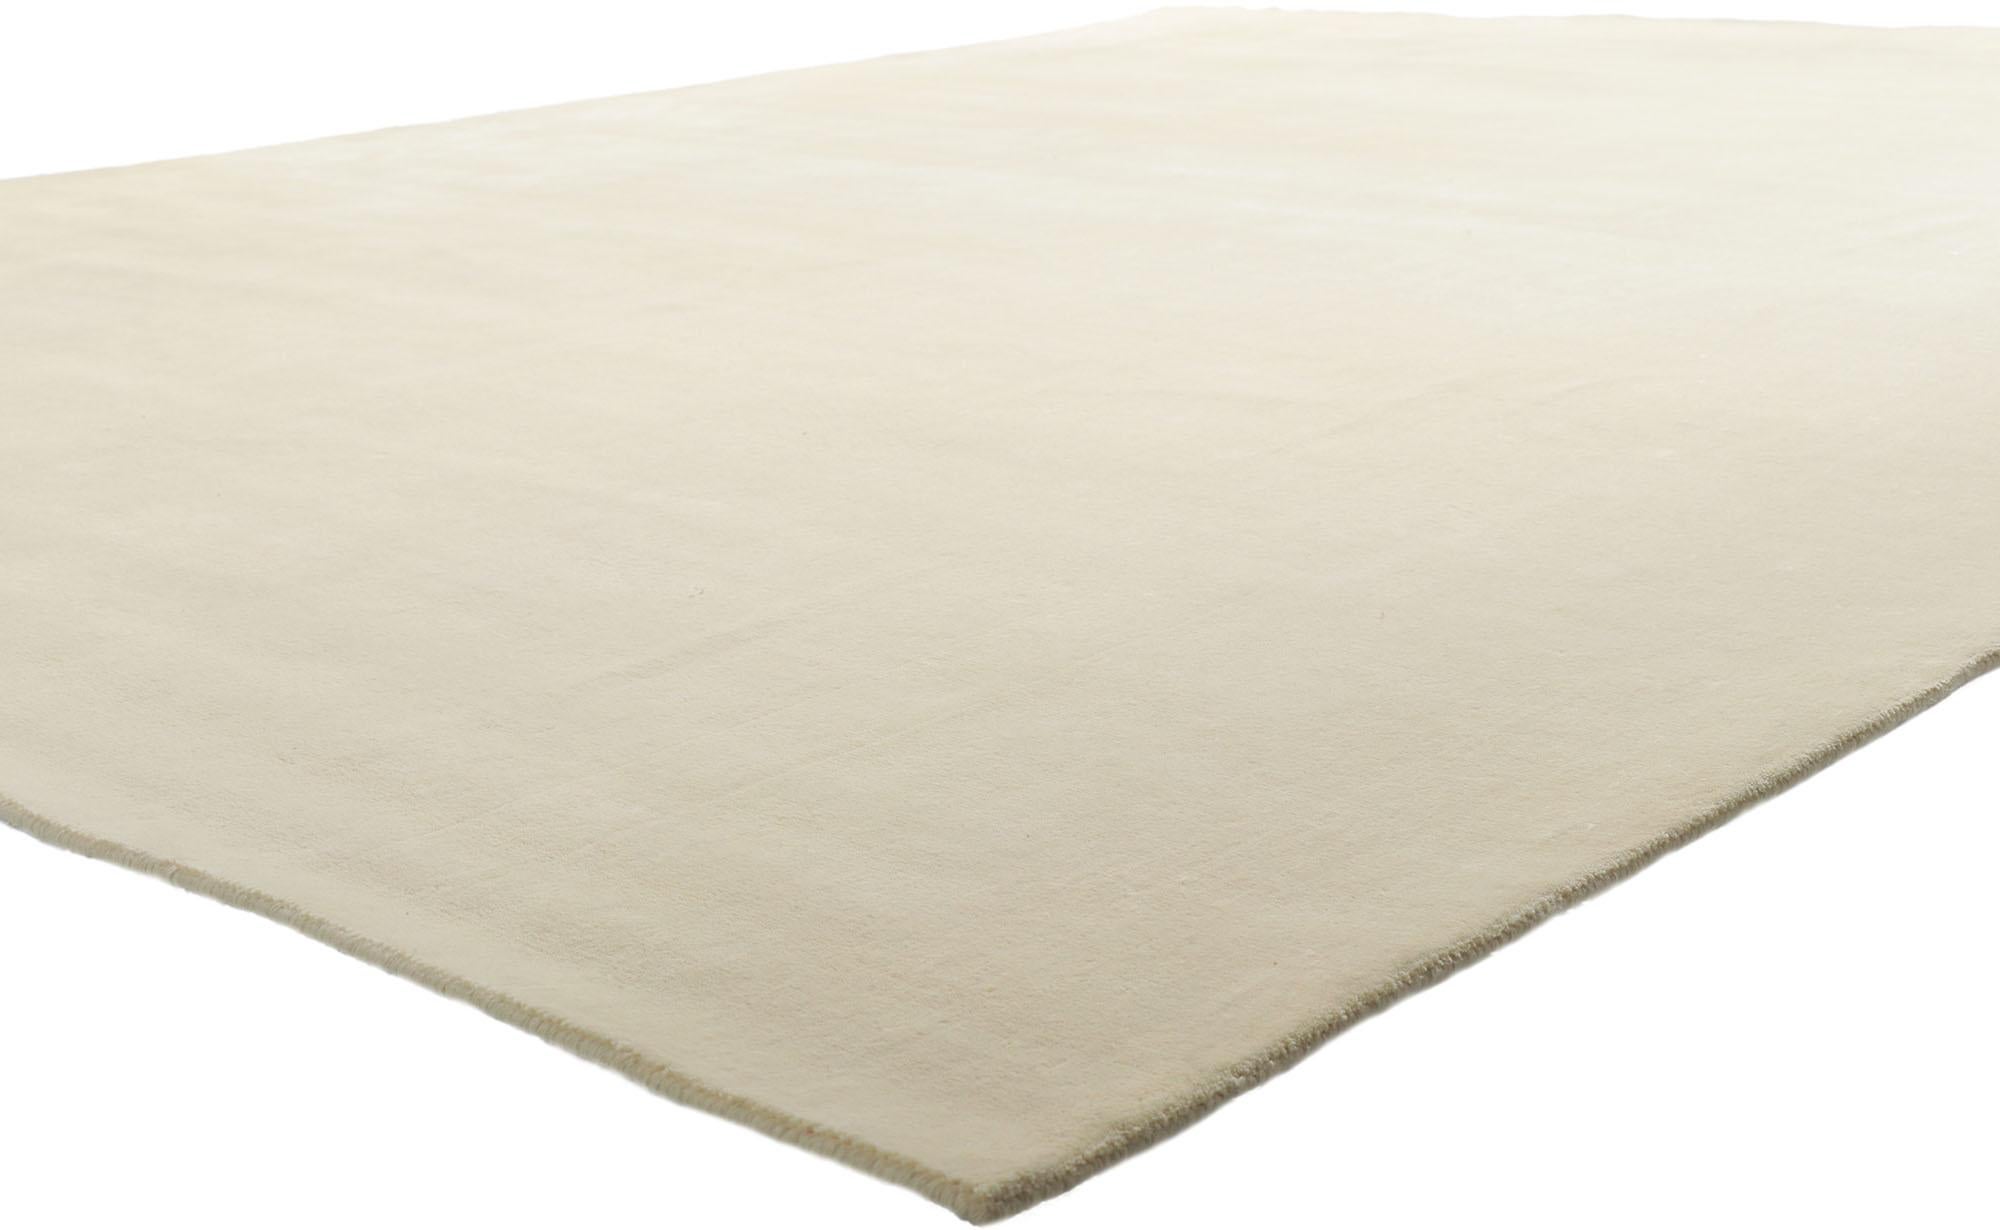 30751 New Contemporary Ivory Area Rug with Minimalist Style, 10'00 x 12'11. Immersed in the enchanting world of contemporary allure and subtle minimalism, this meticulously crafted wool rug unfurls from the skilled looms of modern India. Its essence